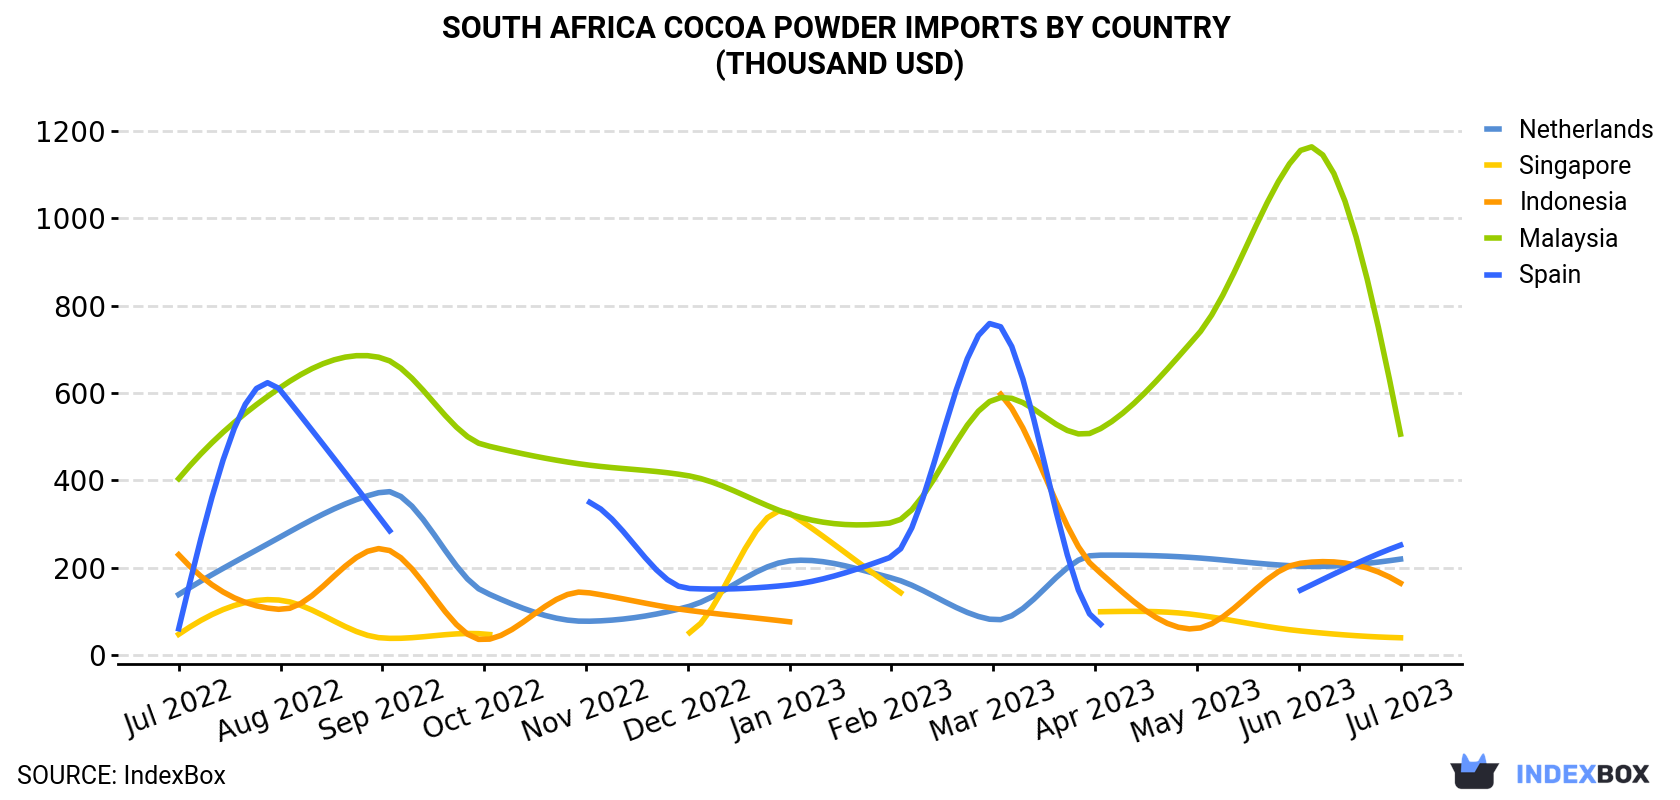 South Africa Cocoa Powder Imports By Country (Thousand USD)